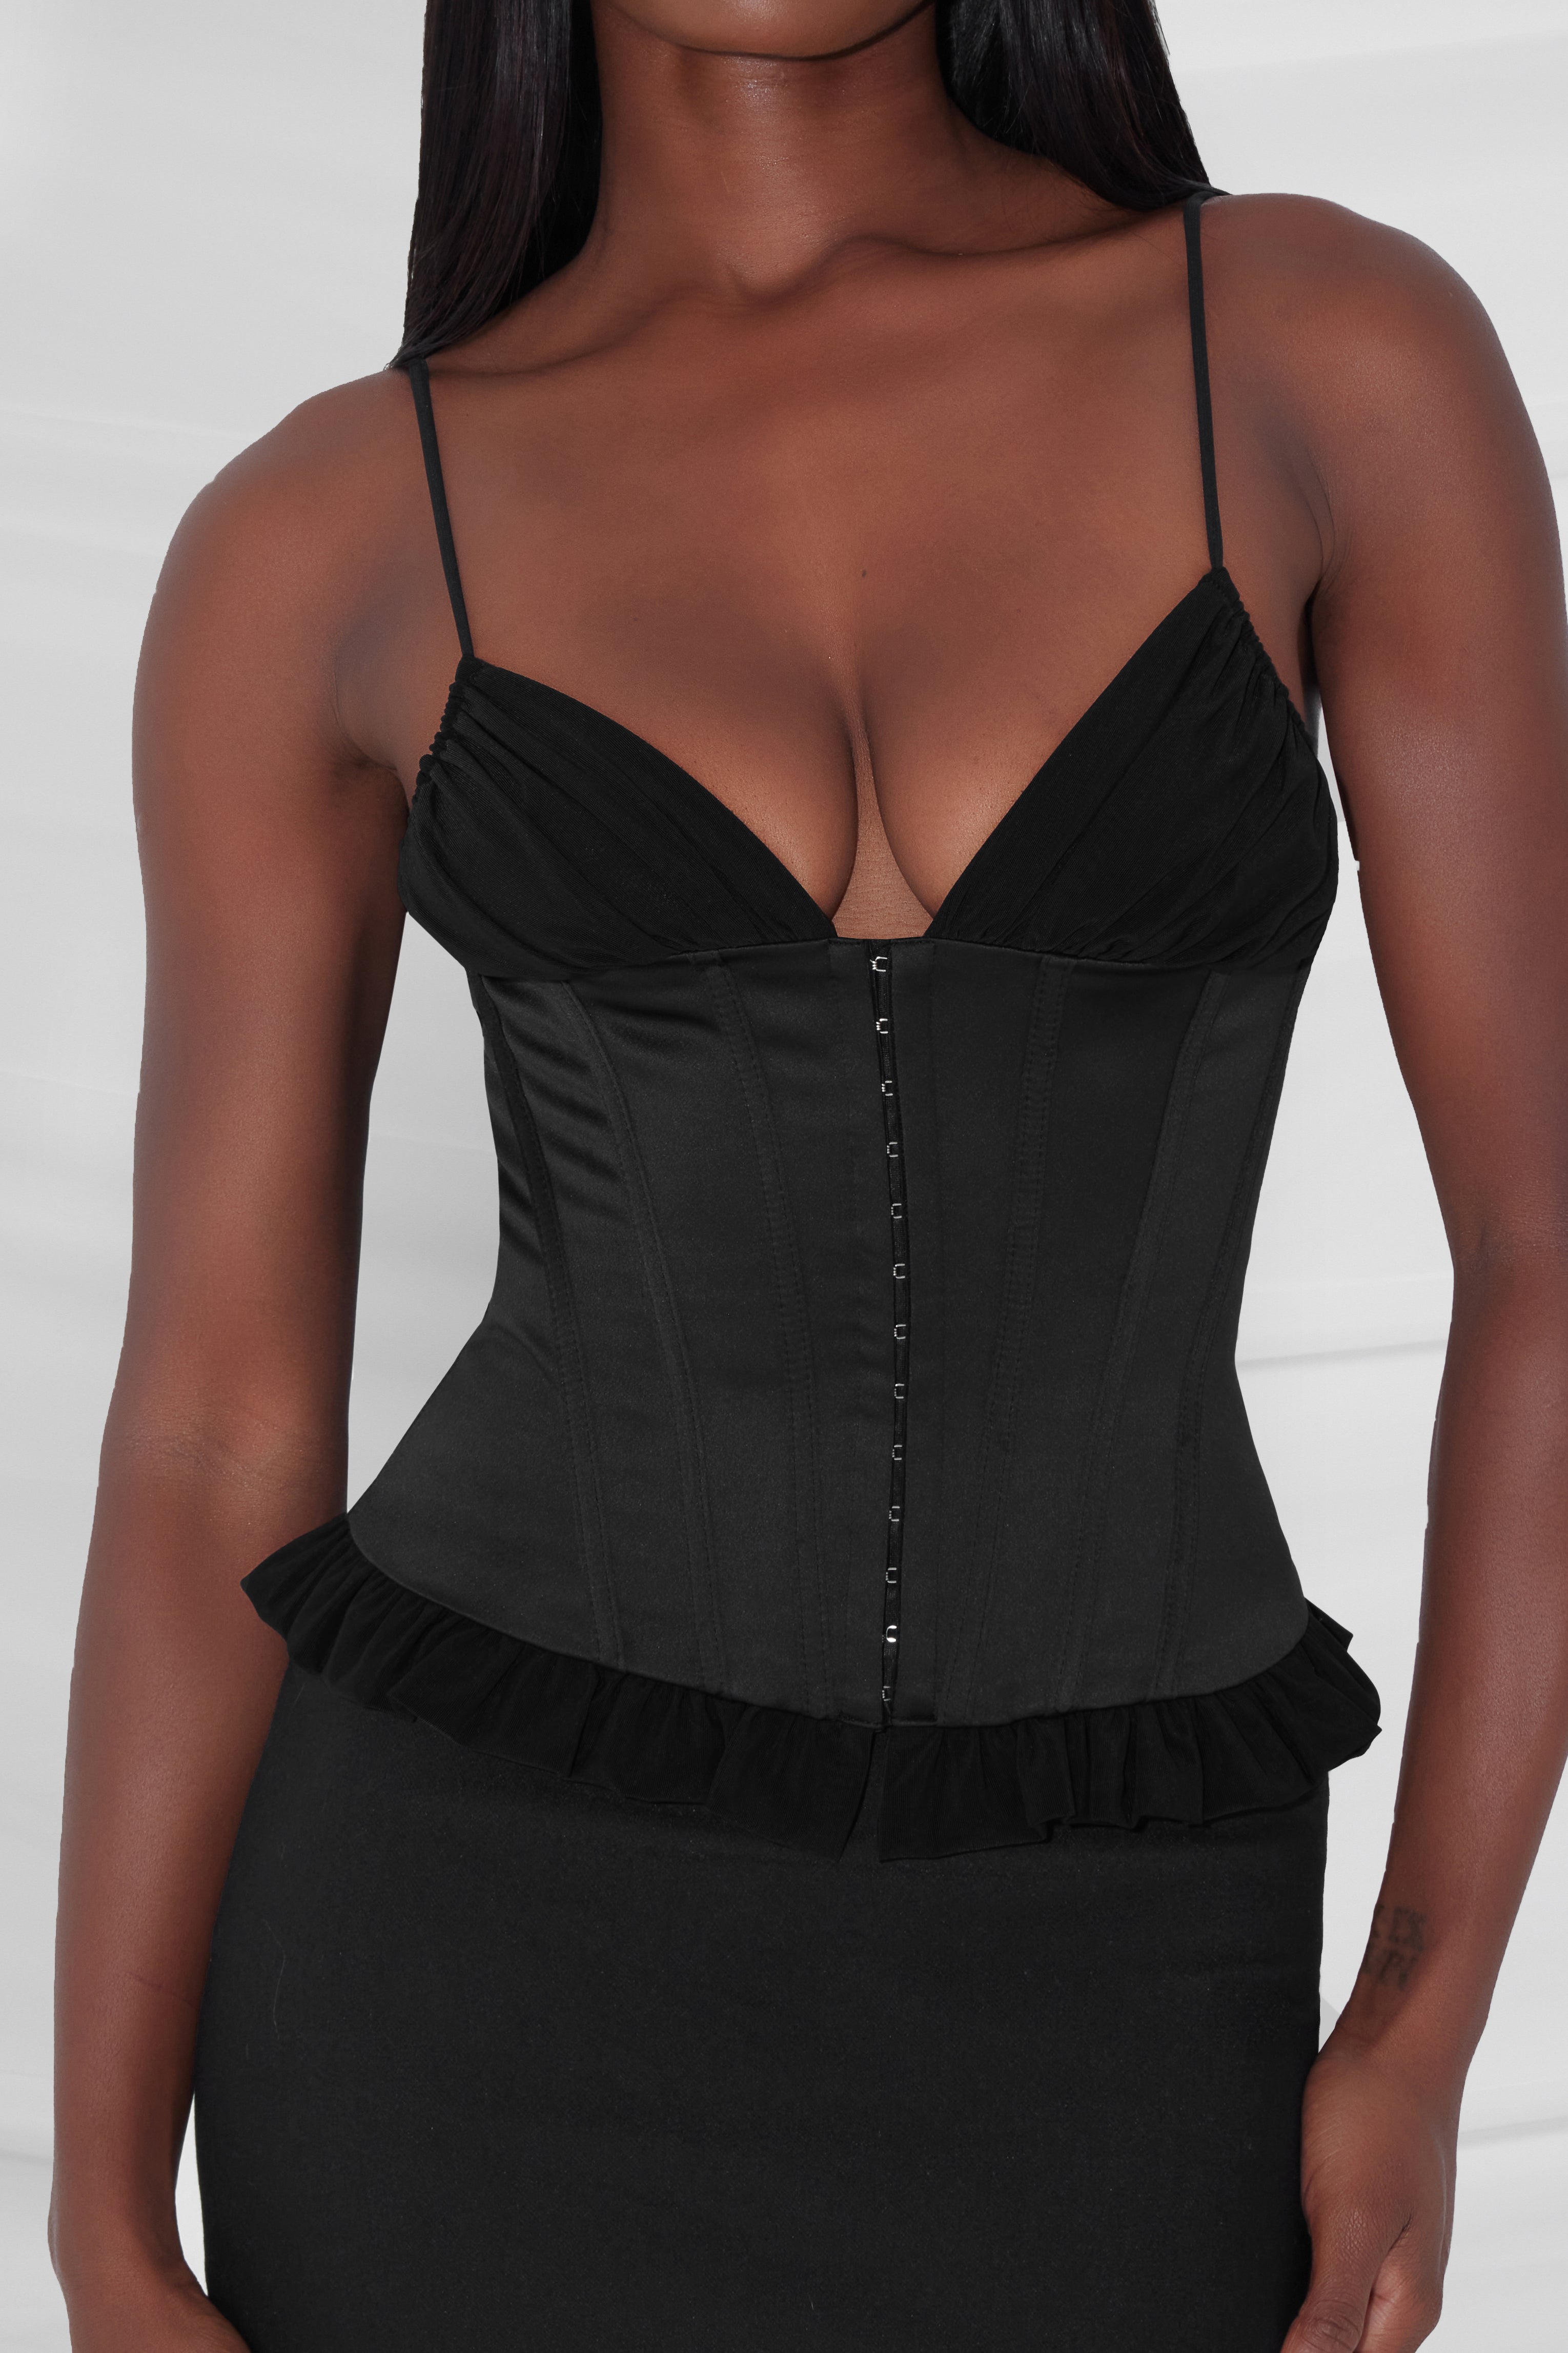 Life of the Party Black Lace Strapless Corset Top – Rebelflow